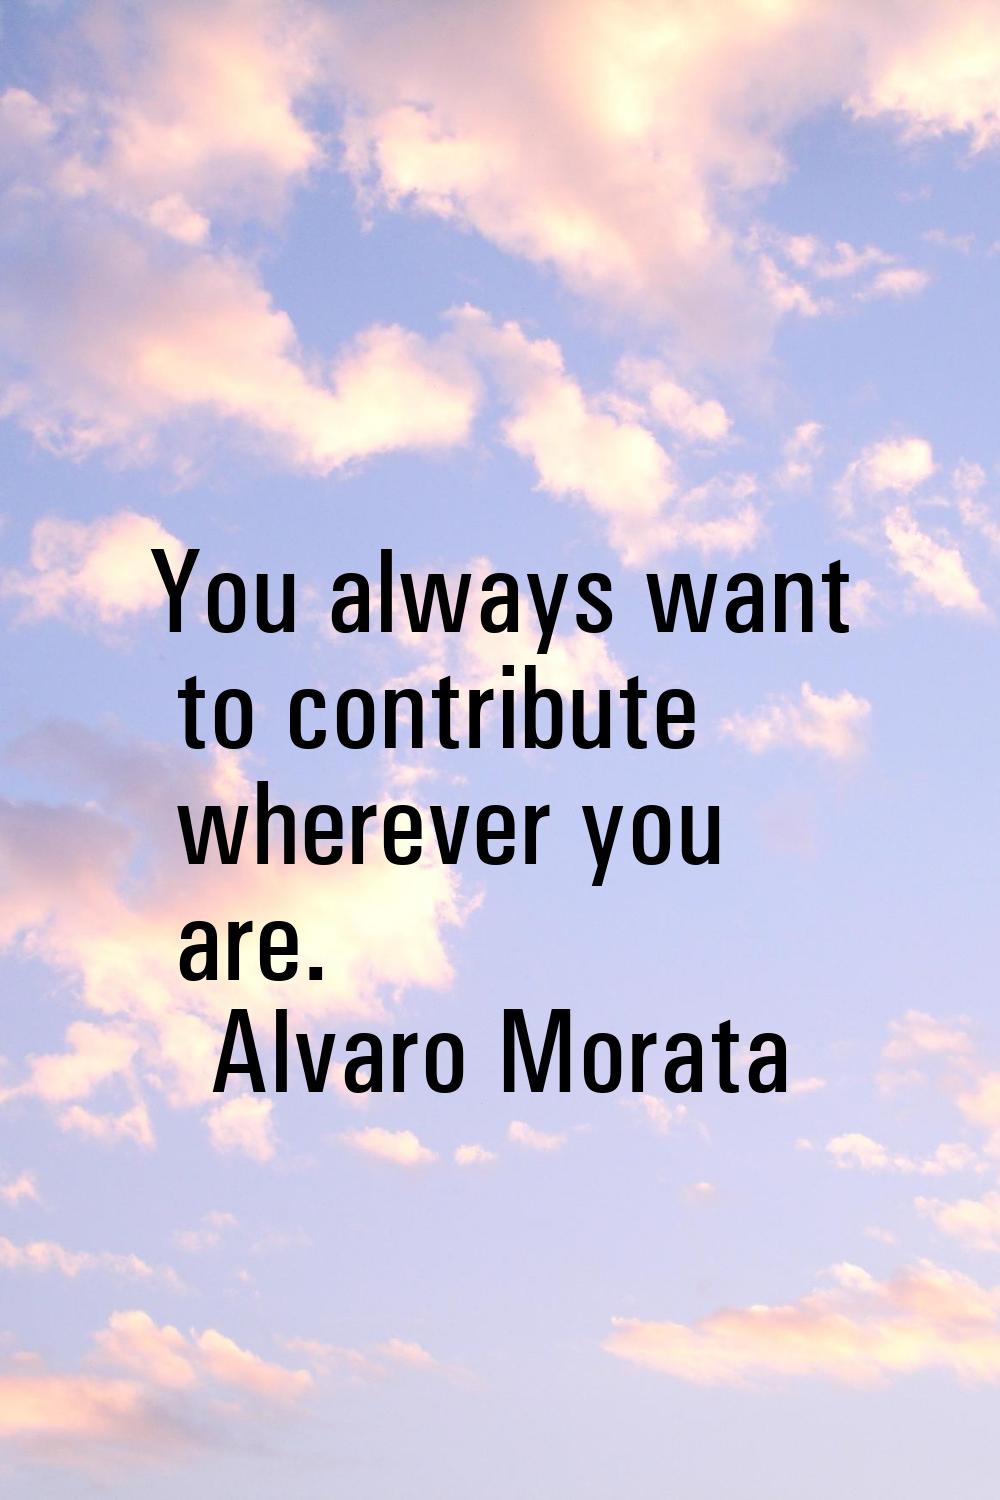 You always want to contribute wherever you are.